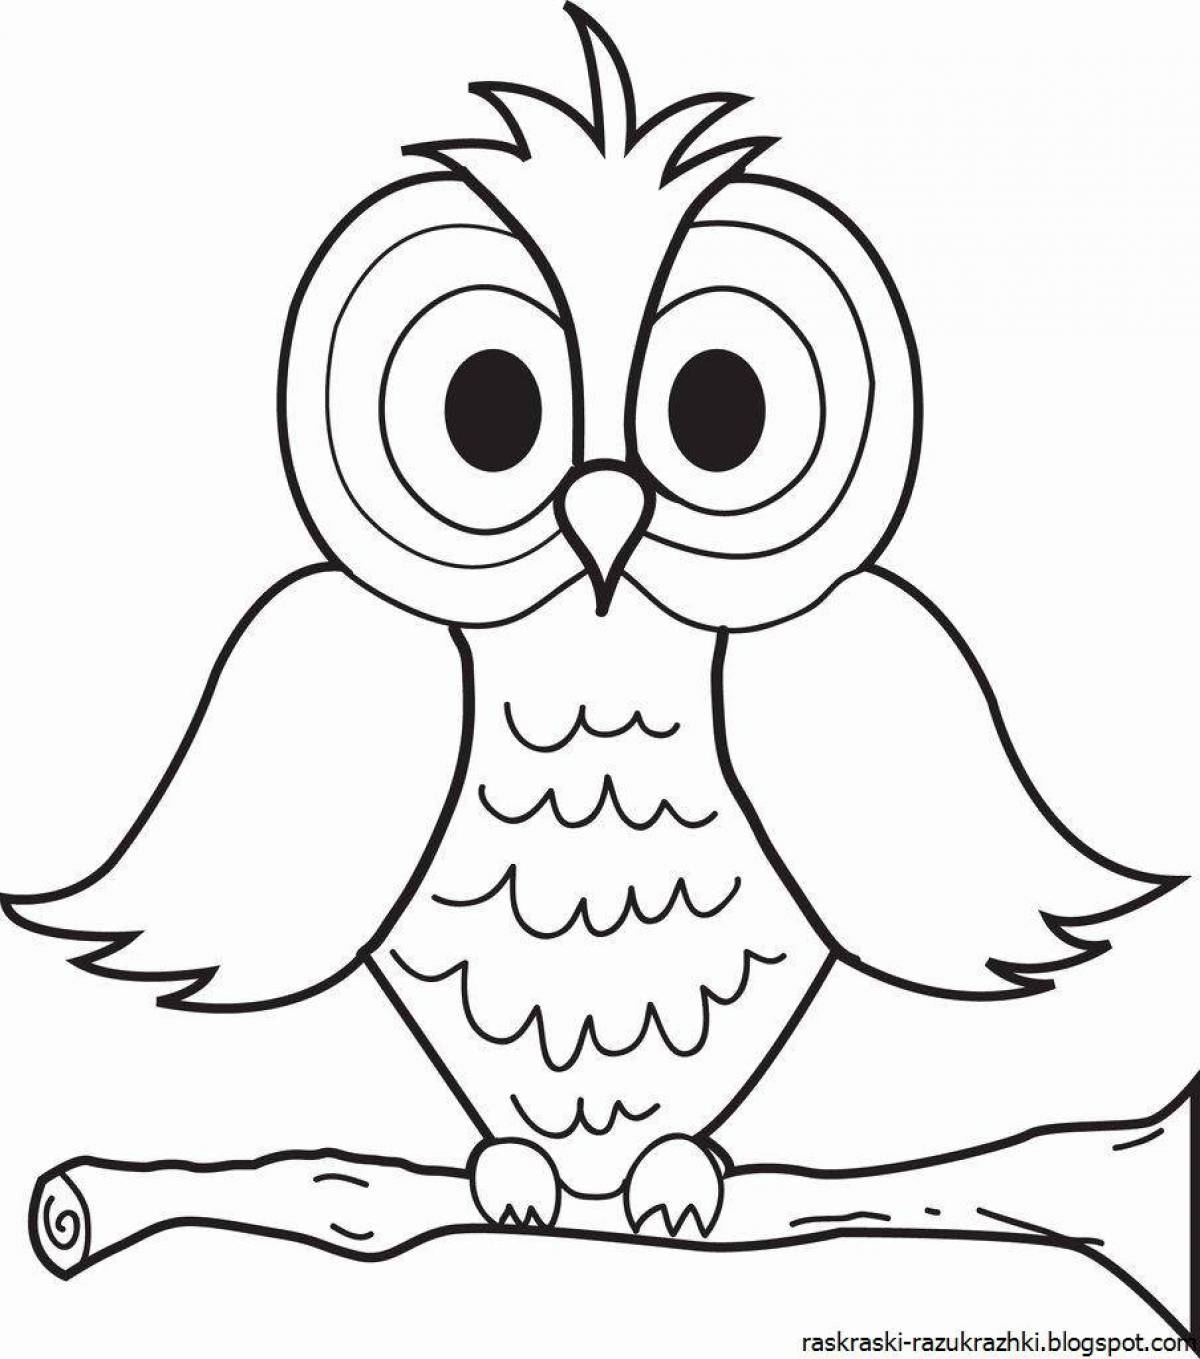 Gorgeous owl coloring book